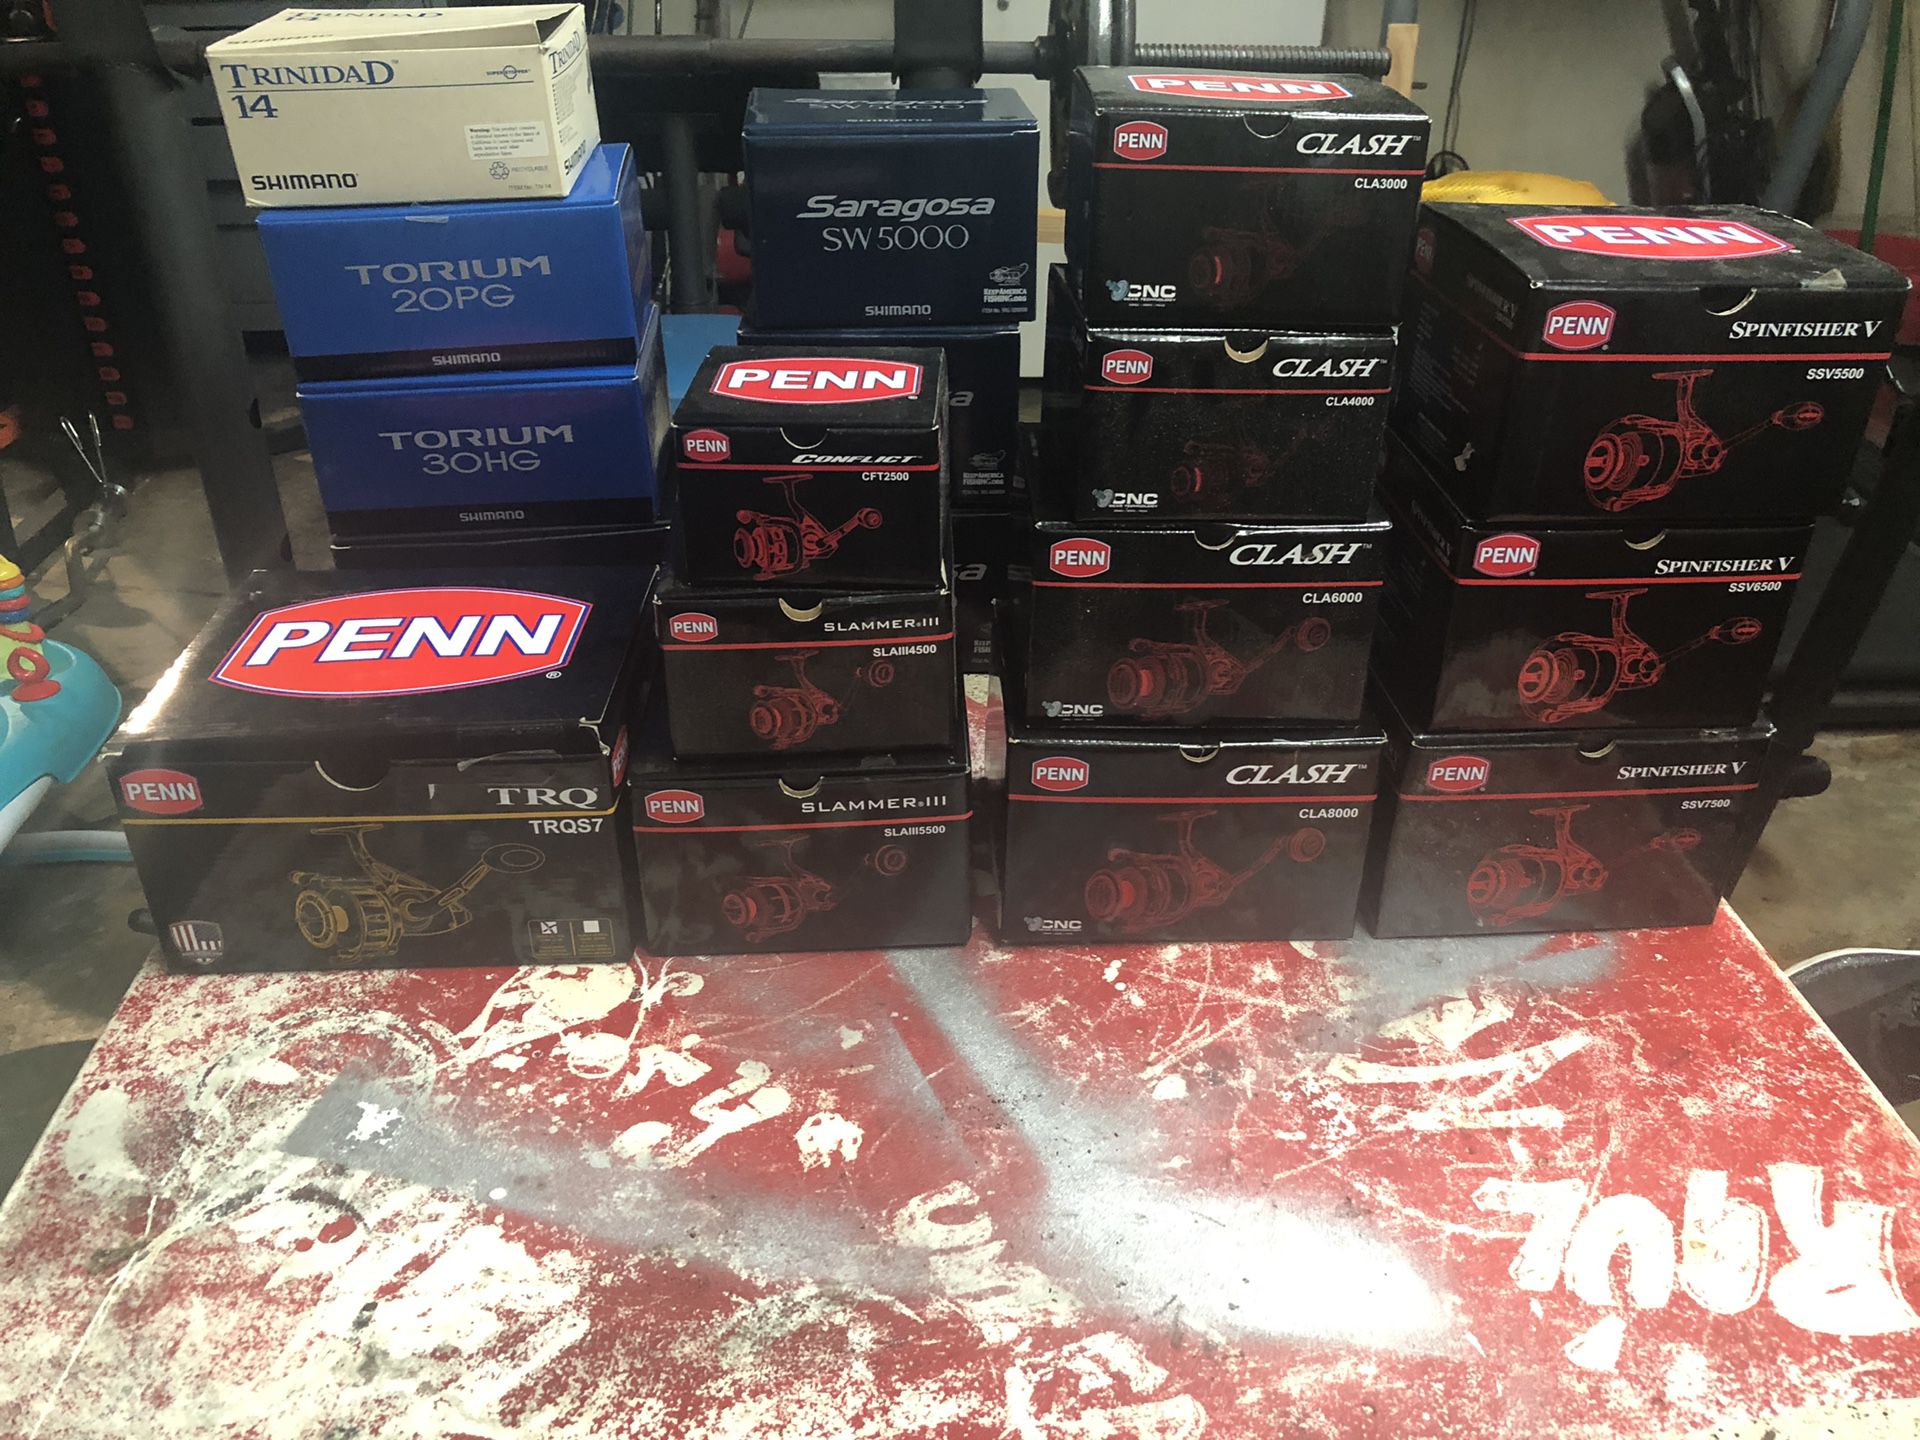 Penn Fishing reel boxes. Sell or trade